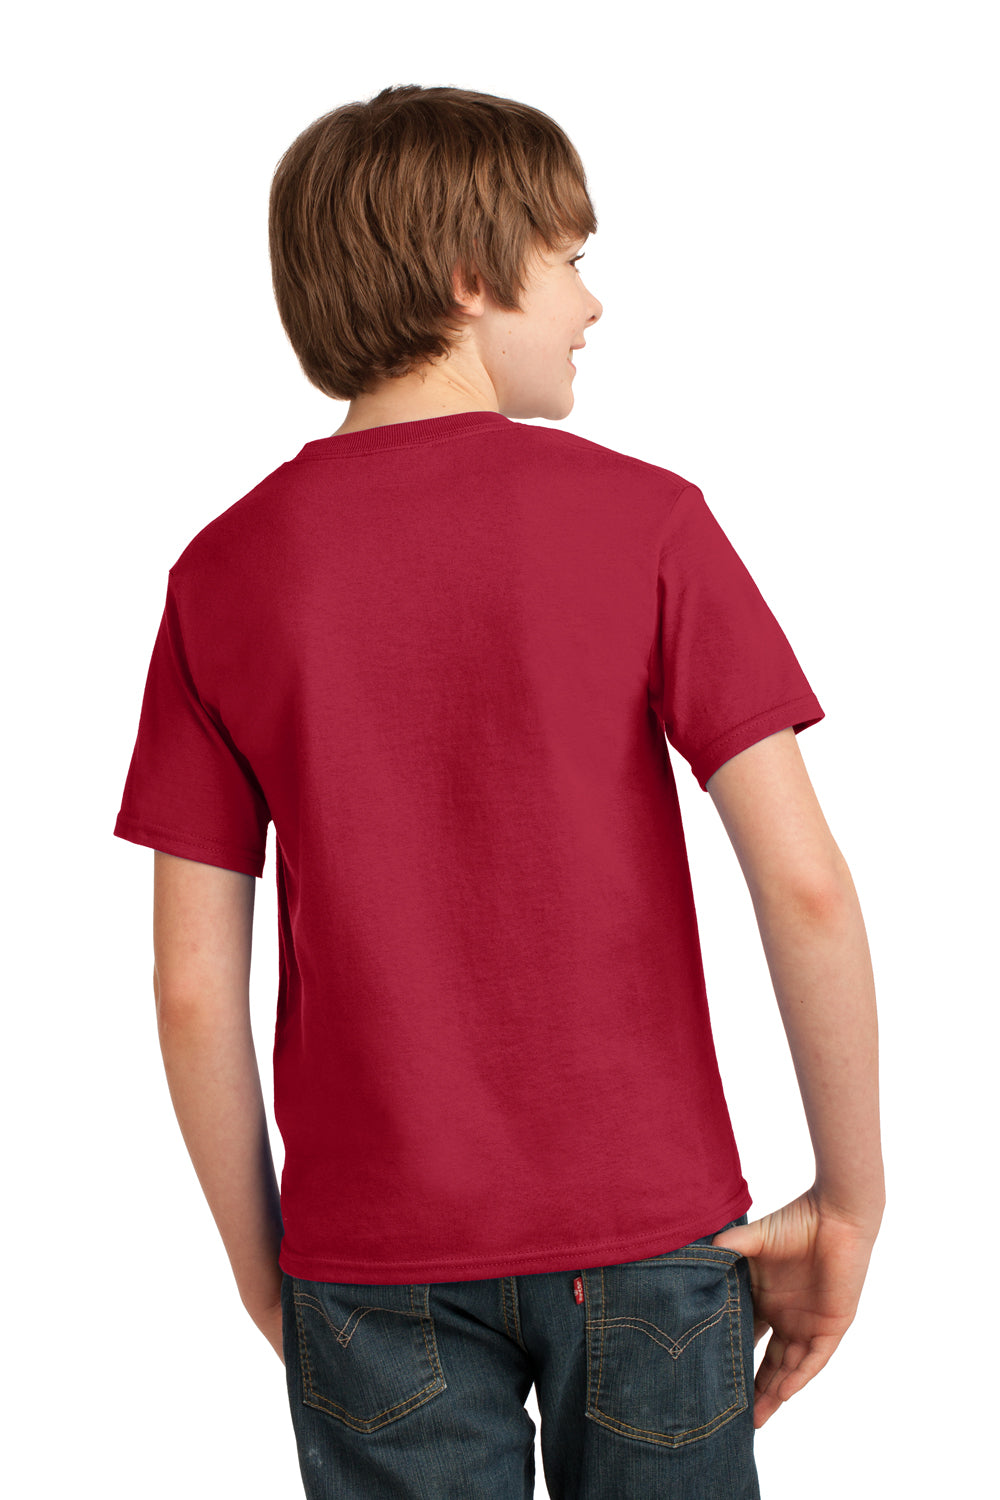 Port & Company PC61Y Youth Essential Short Sleeve Crewneck T-Shirt Red Back